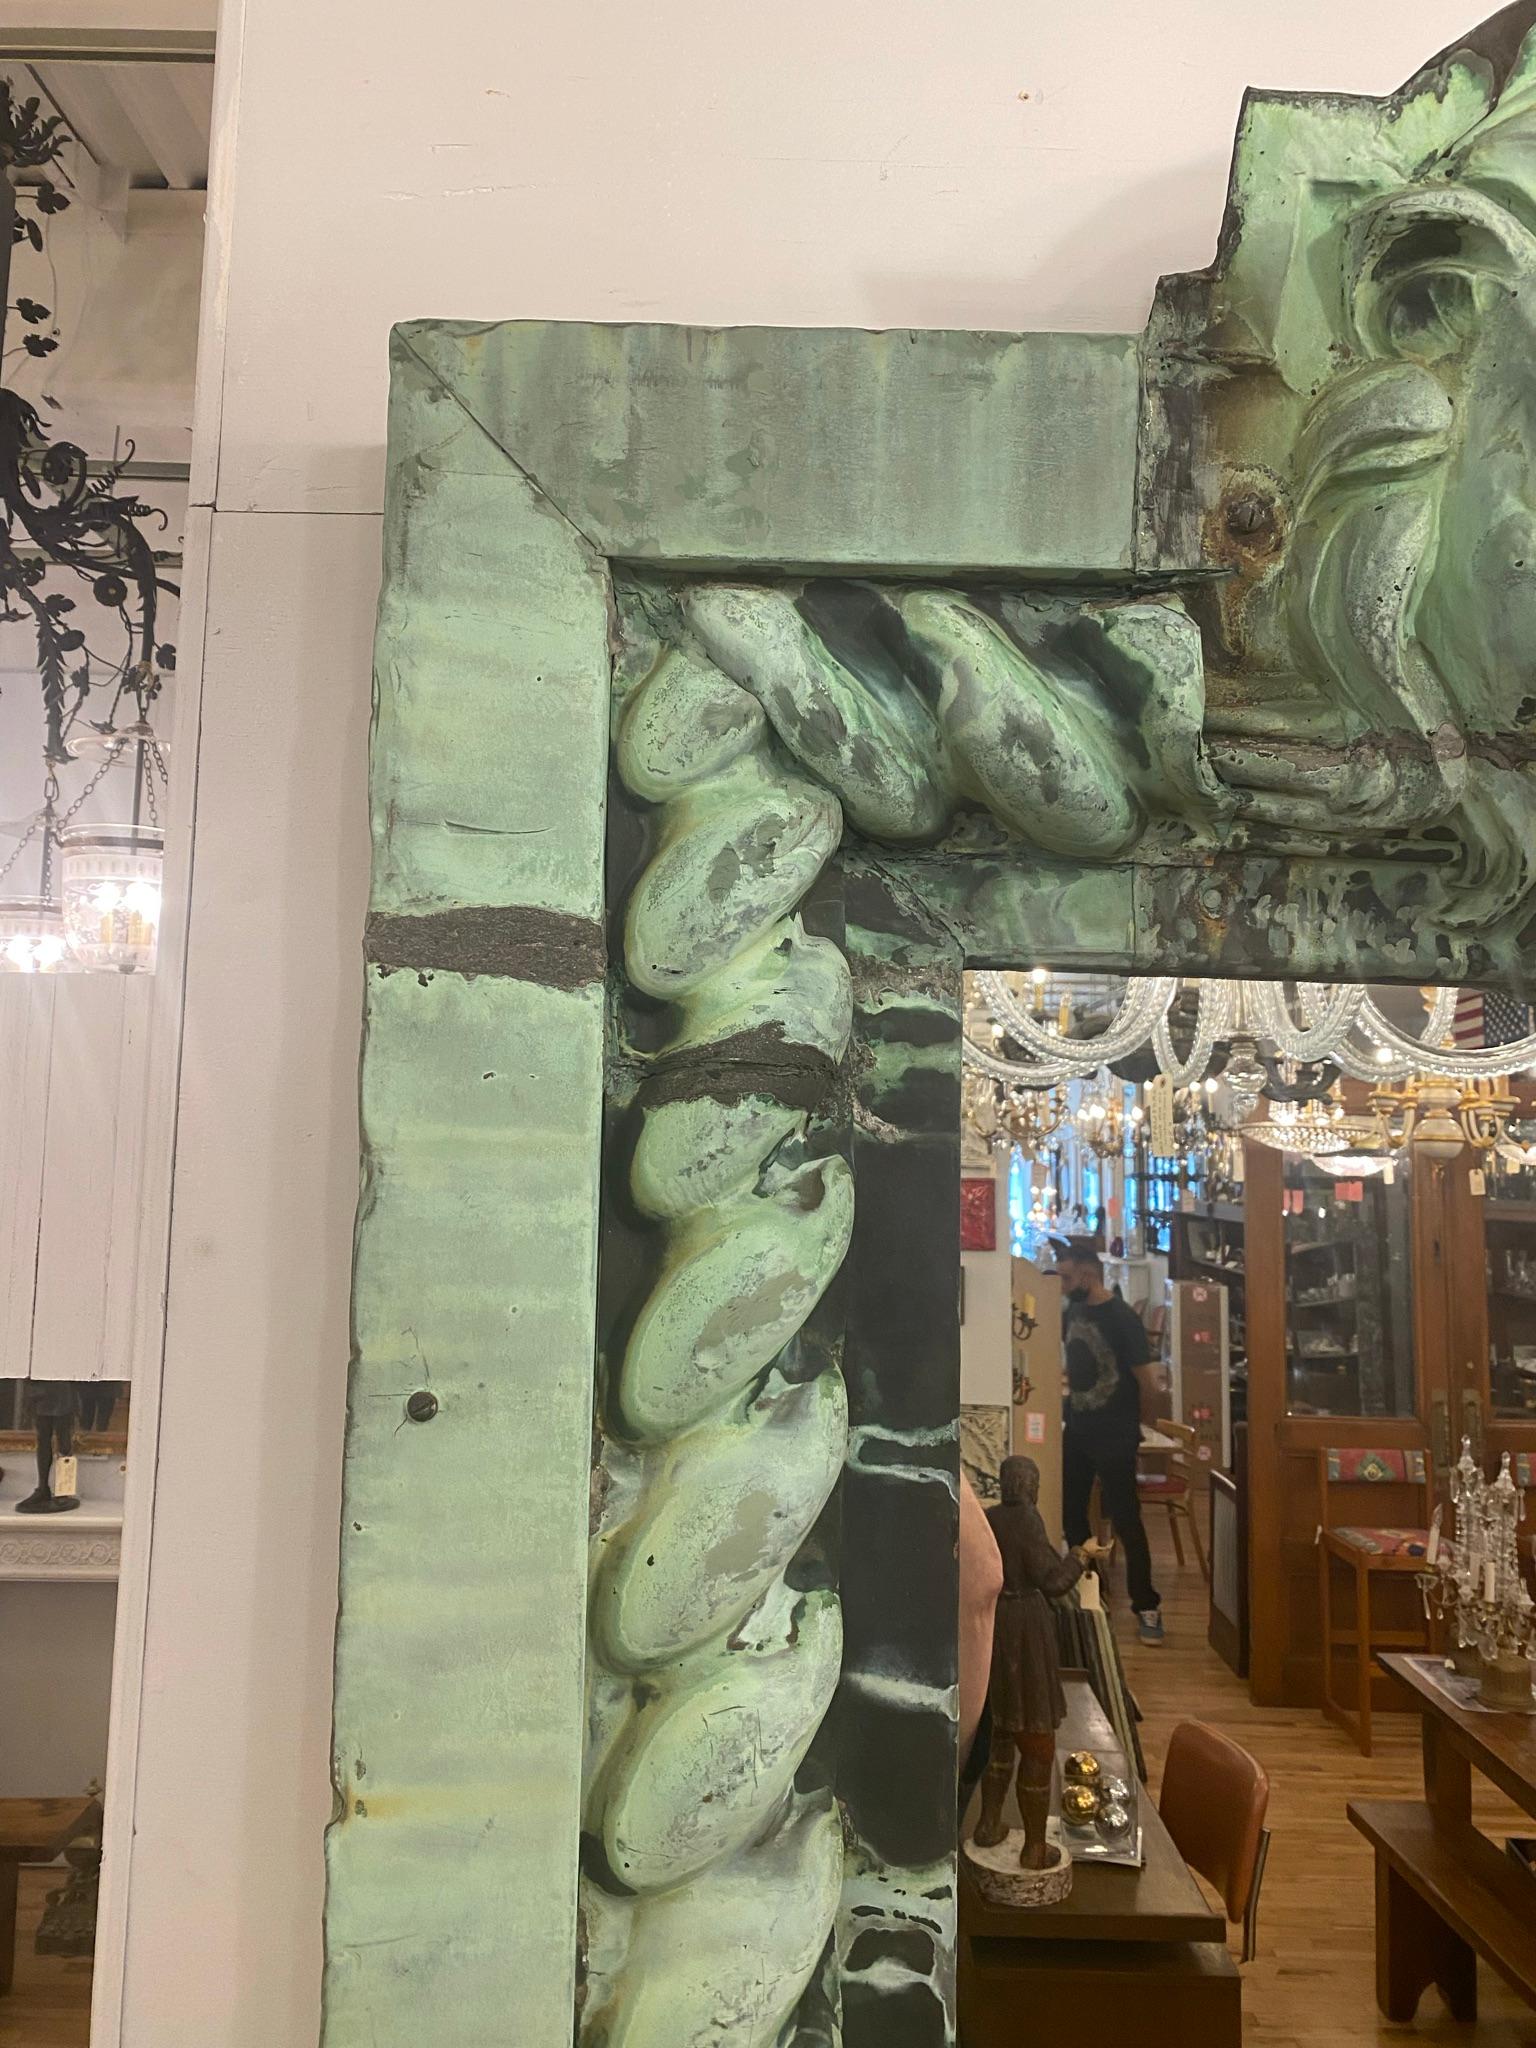 Wood Massive Copper Lion Head Cornice Mirror Oversized from NYC Buildings w/ Patina